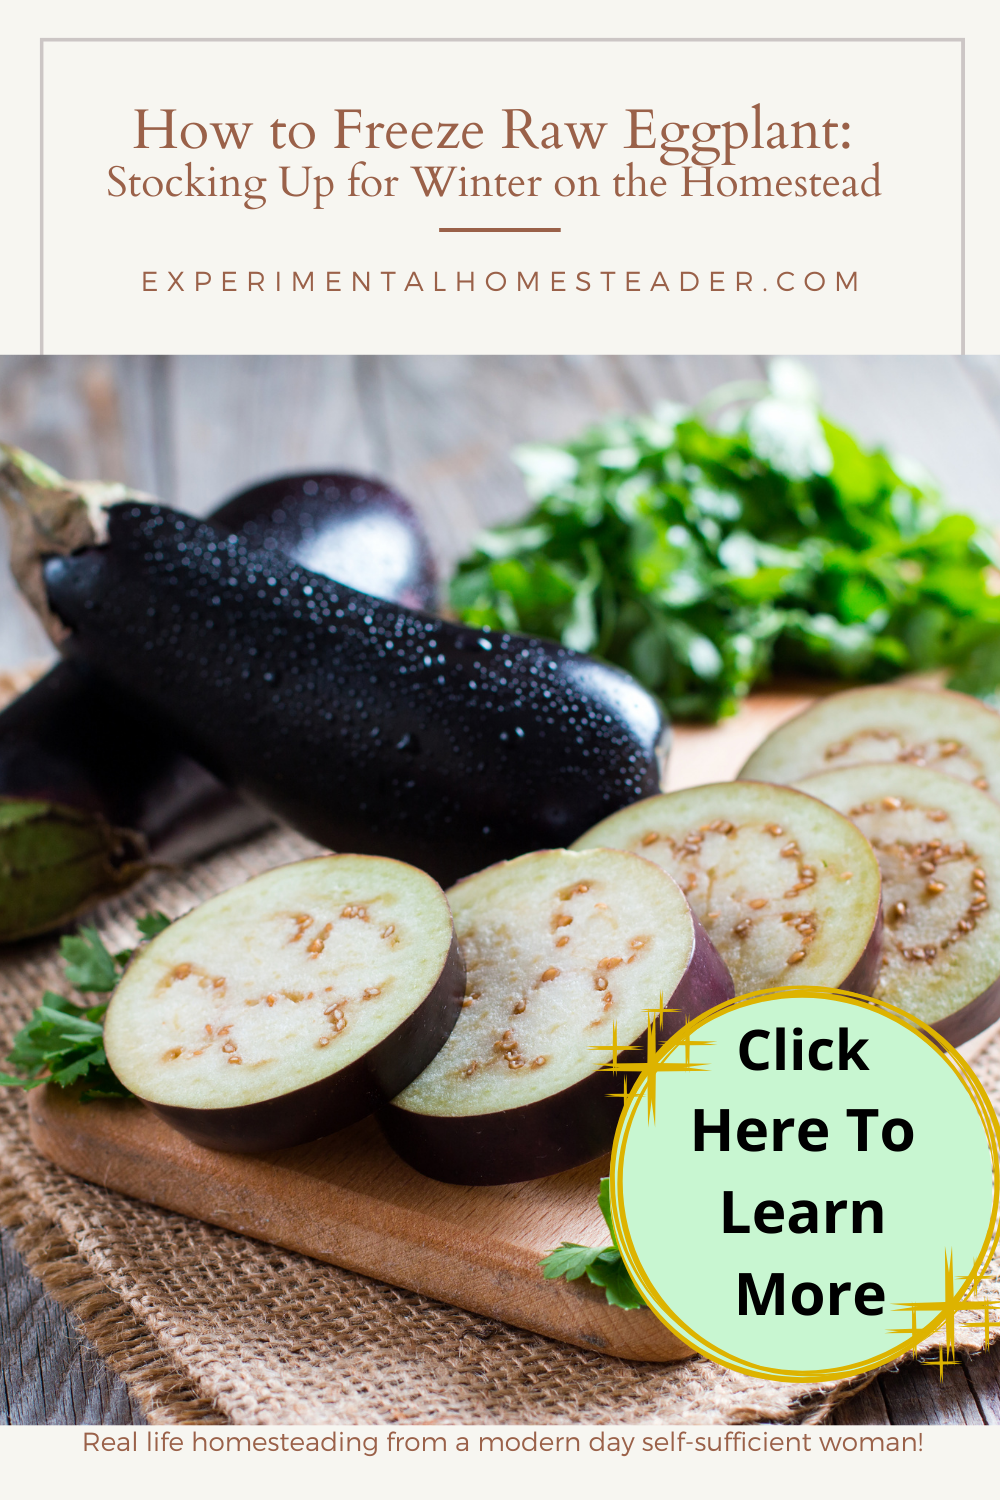 A whole eggplant in the background with eggplant slices on a cutting board in front.